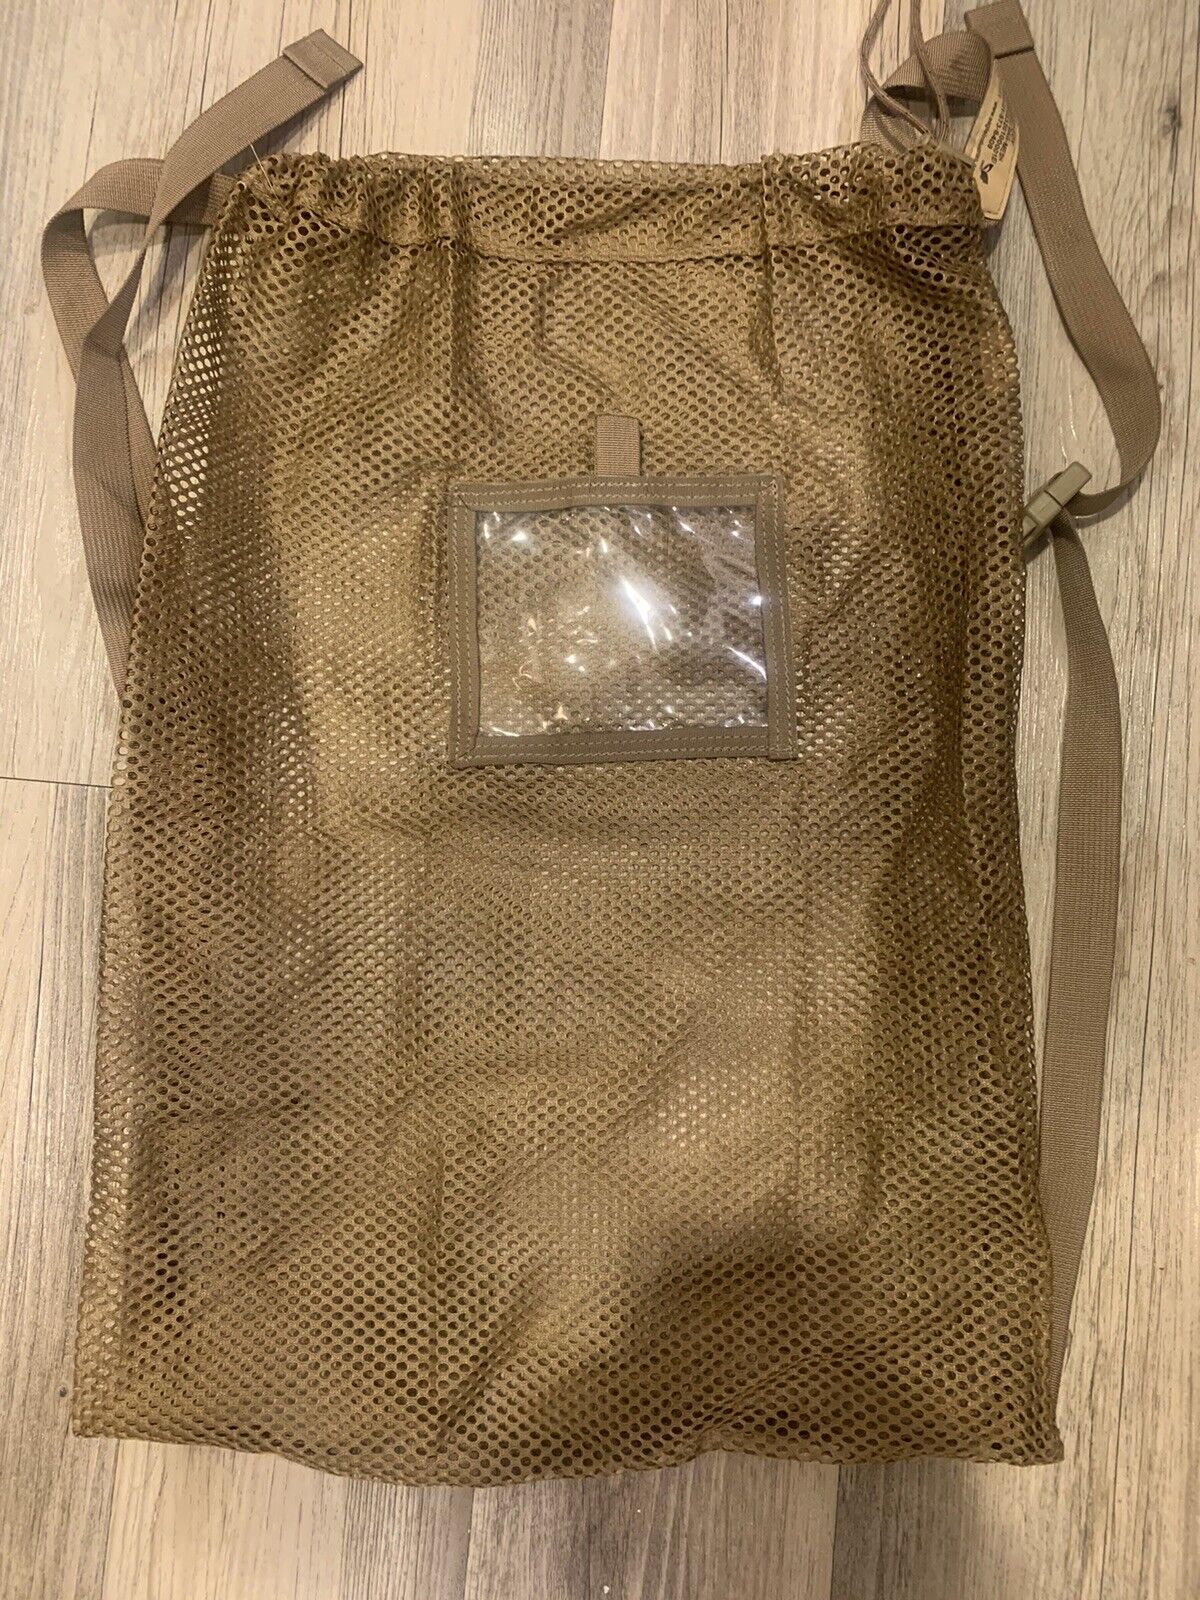 New Eagle Industries Brown Evidence Bag - Mesh